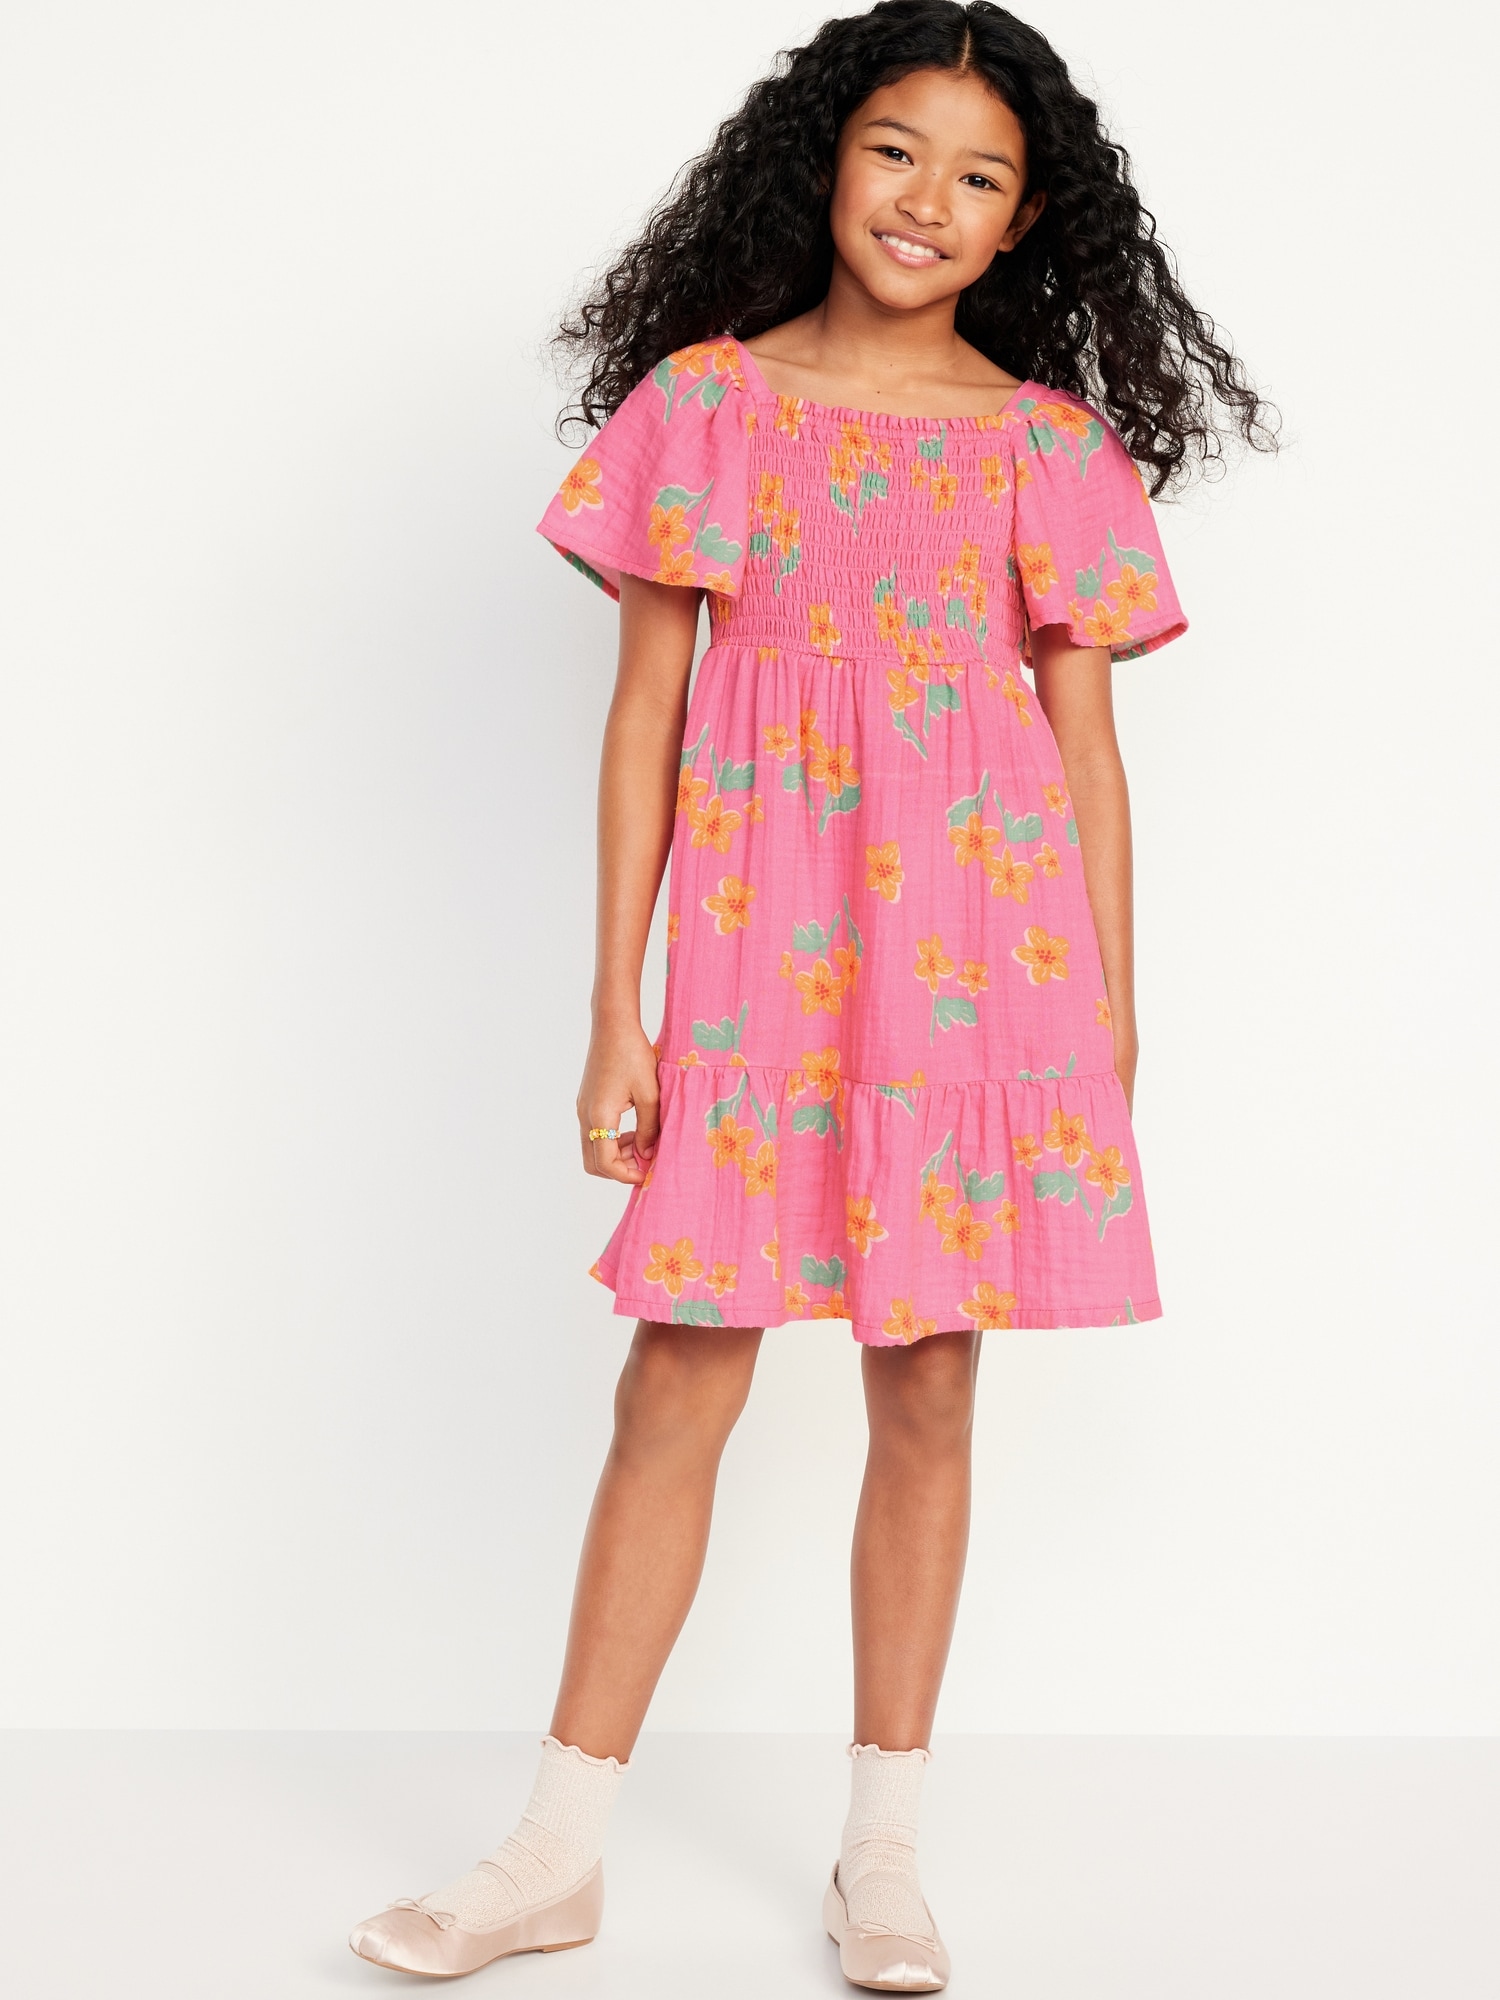 Printed Short-Sleeve Smocked Tiered Dress for Girls Hot Deal